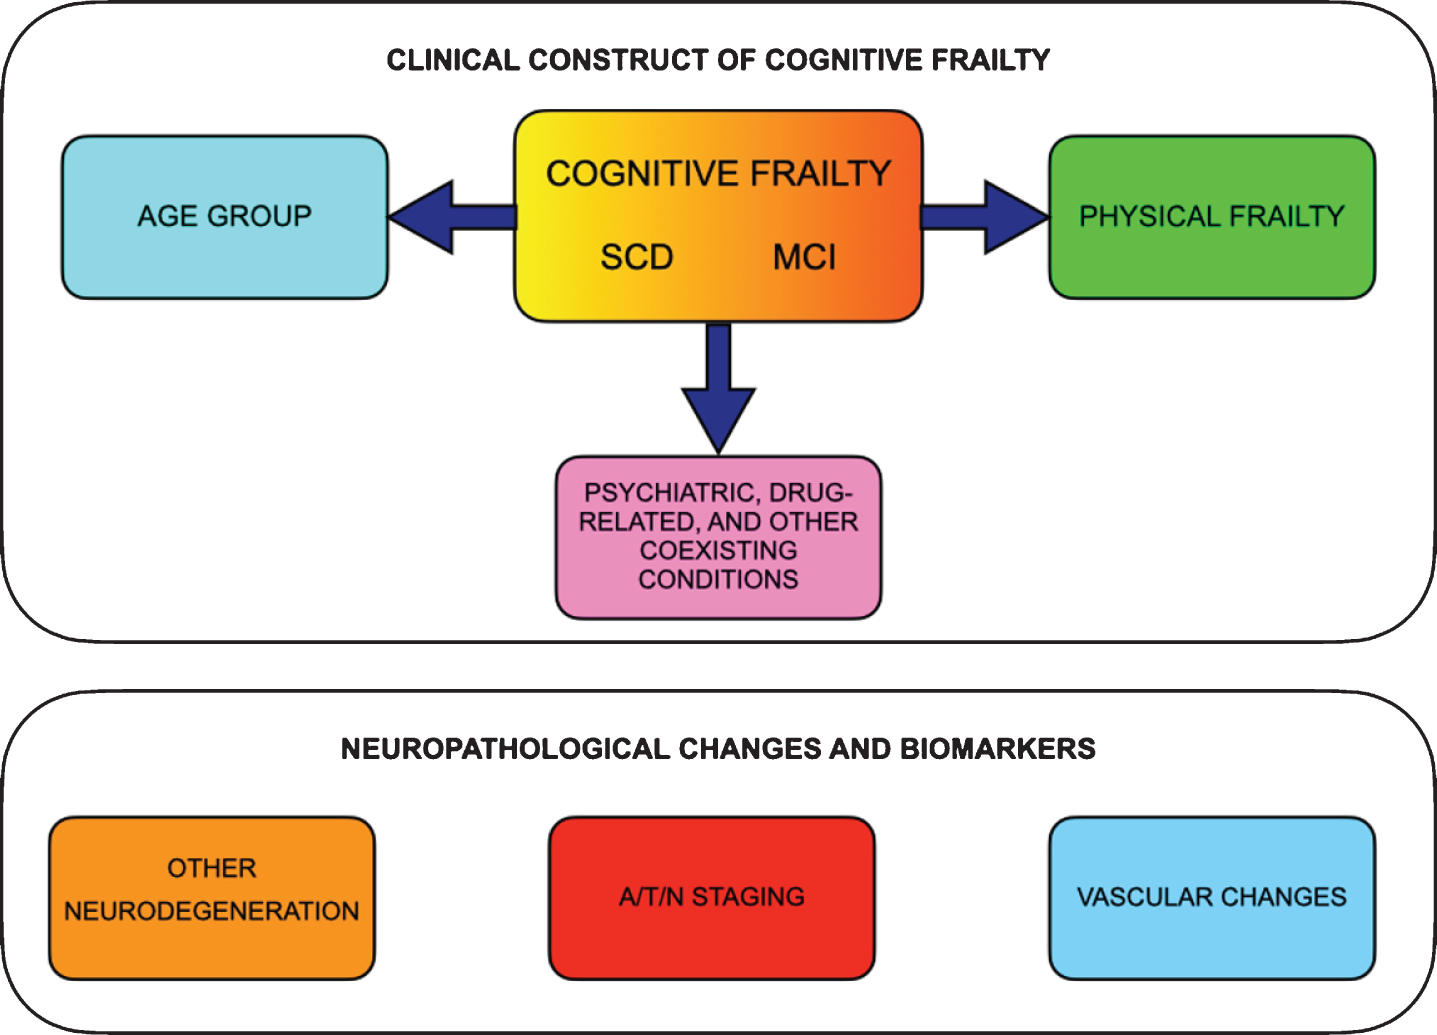 The proposed multidimensional clinical construct of cognitive frailty and the parallel neuropathological changes and biomarkers. Clinical construct of cognitive frailty should include subjective cognitive decline (SCD) or mild cognitive impairment (MCI) together with physical frailty and should consider age range and comorbidities (i.e., psychiatric, drug-related and other coexisting conditions). The neuropathological changes and biomarkers, if present, may offer additional prognostic information, e.g., stratifying the risk of conversion to dementia.